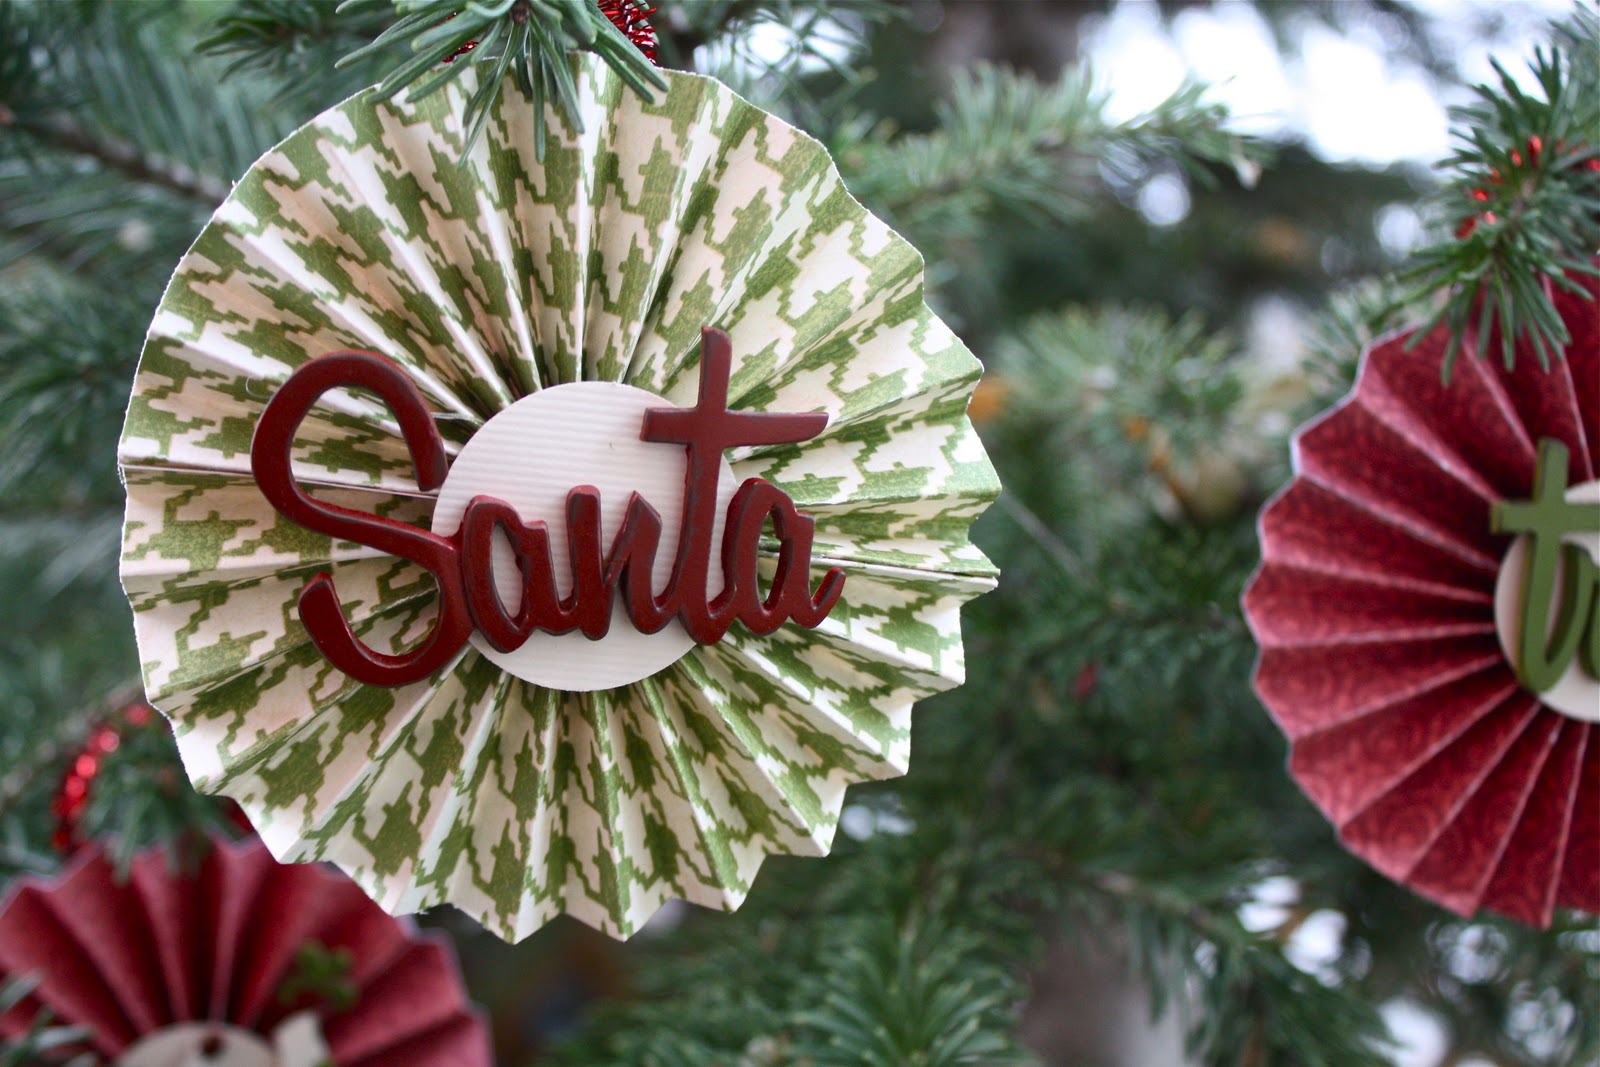 Paper Christmas Decorations You Can Make at Home - A DIY Projects